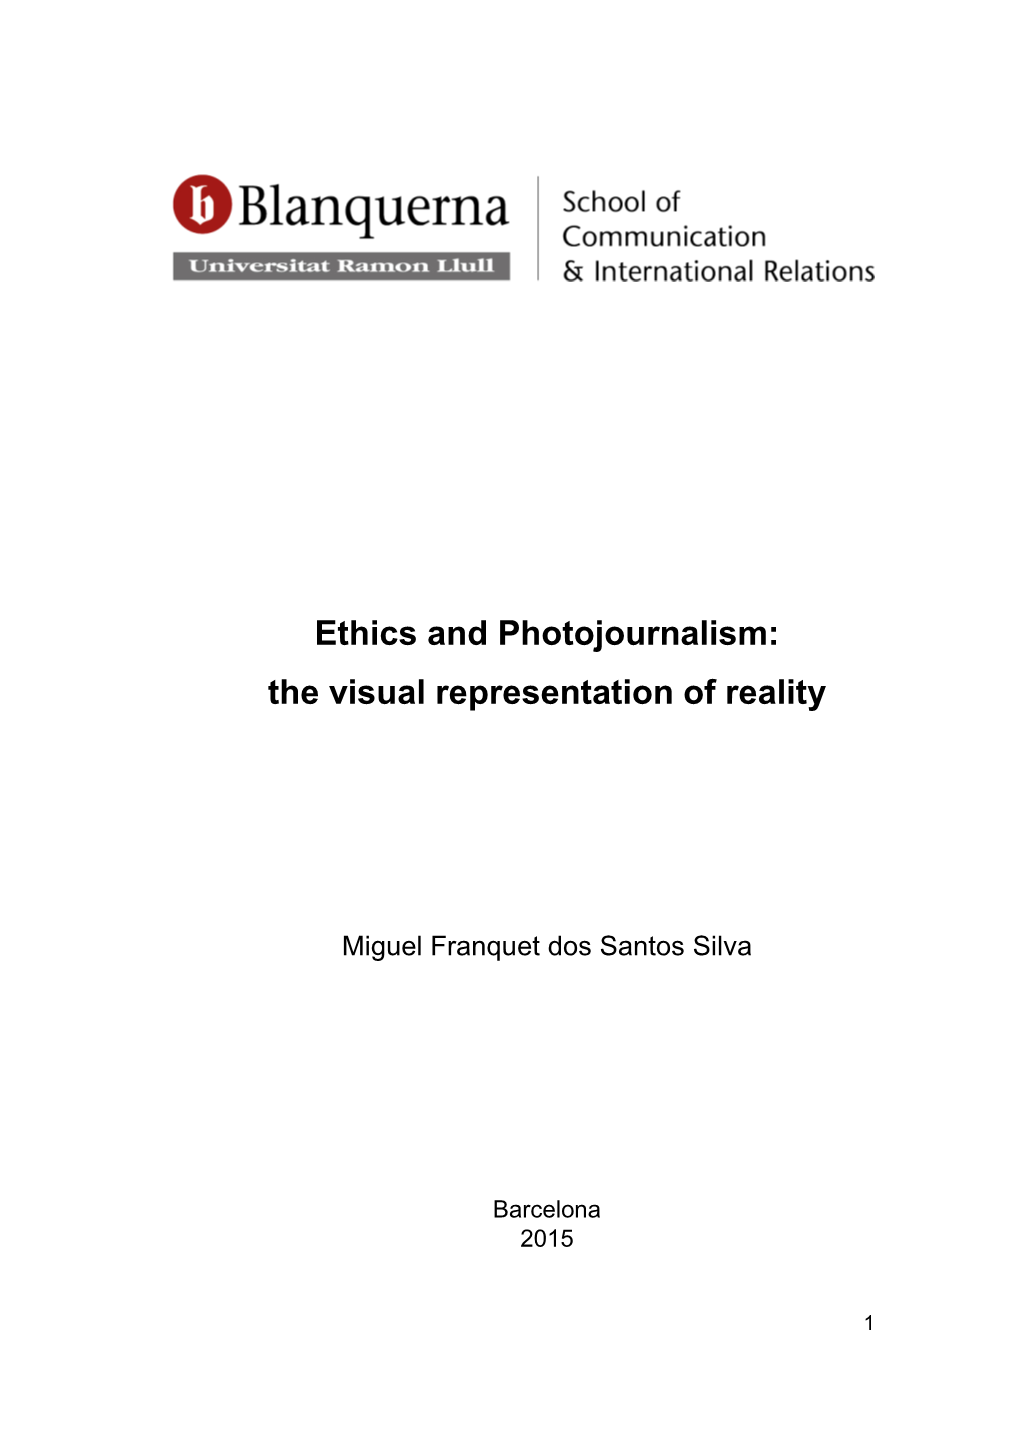 Ethics and Photojournalism: the Visual Representation of Reality